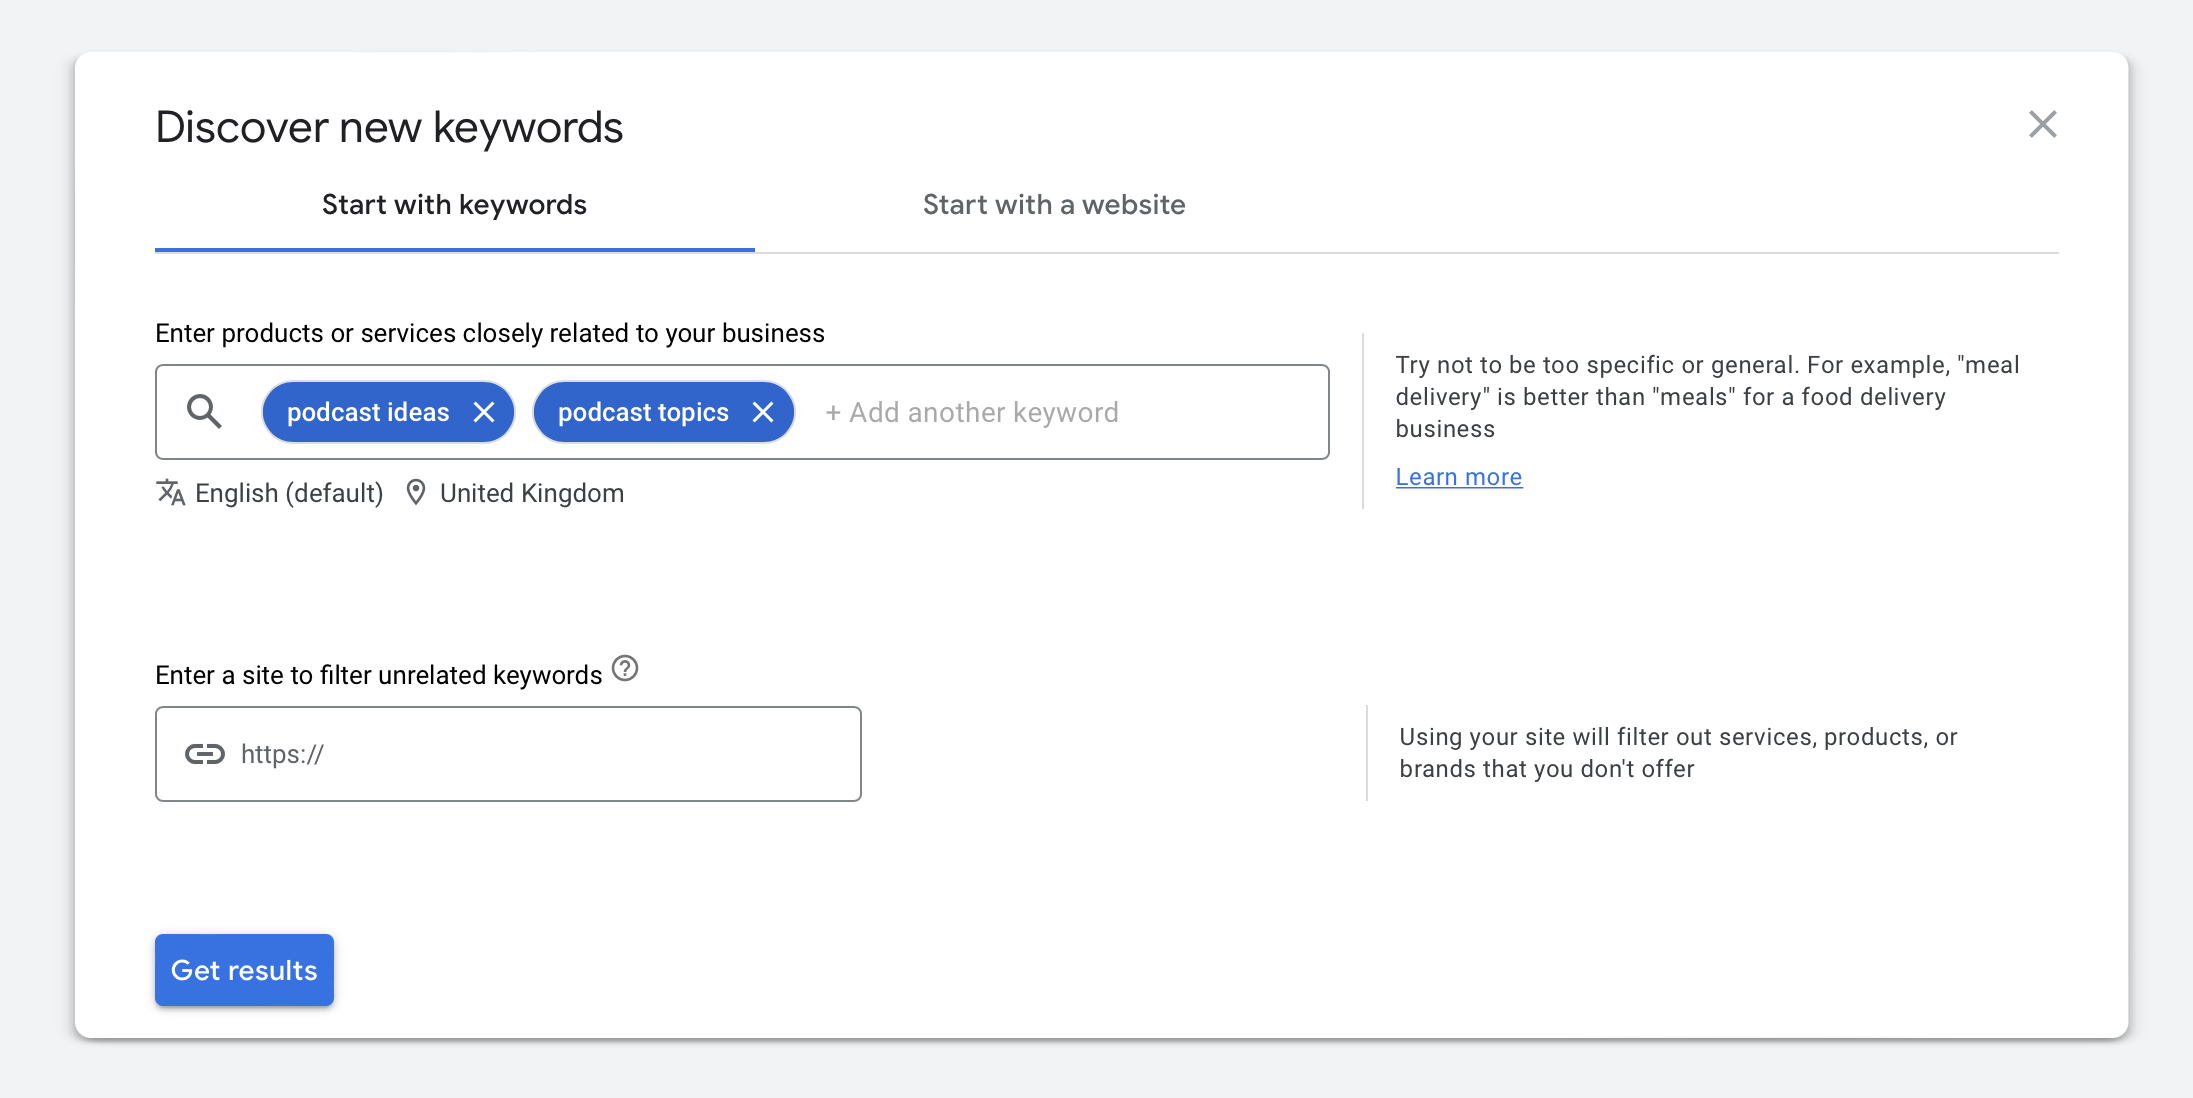 Use Google Keyword Planner to discover new keywords